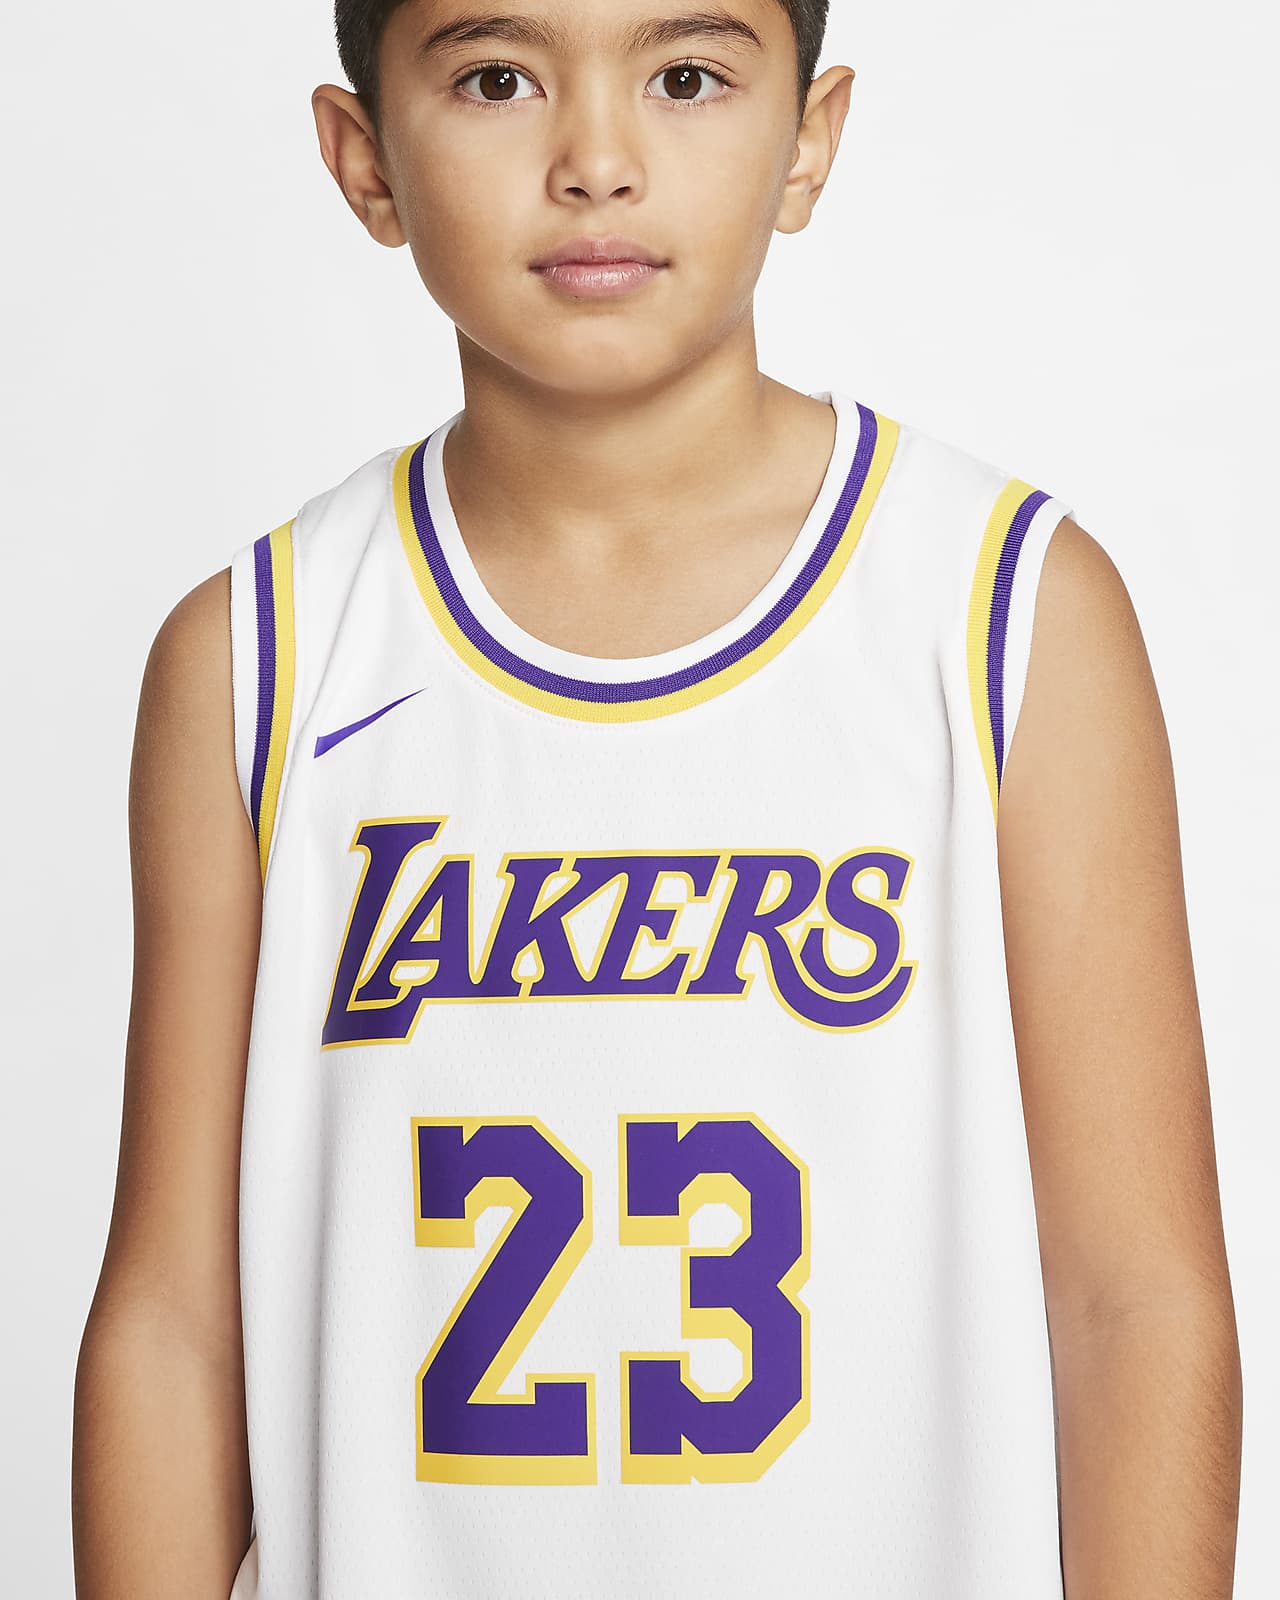 lebron jersey youth lakers Off 63% - www.bashhguidelines.org